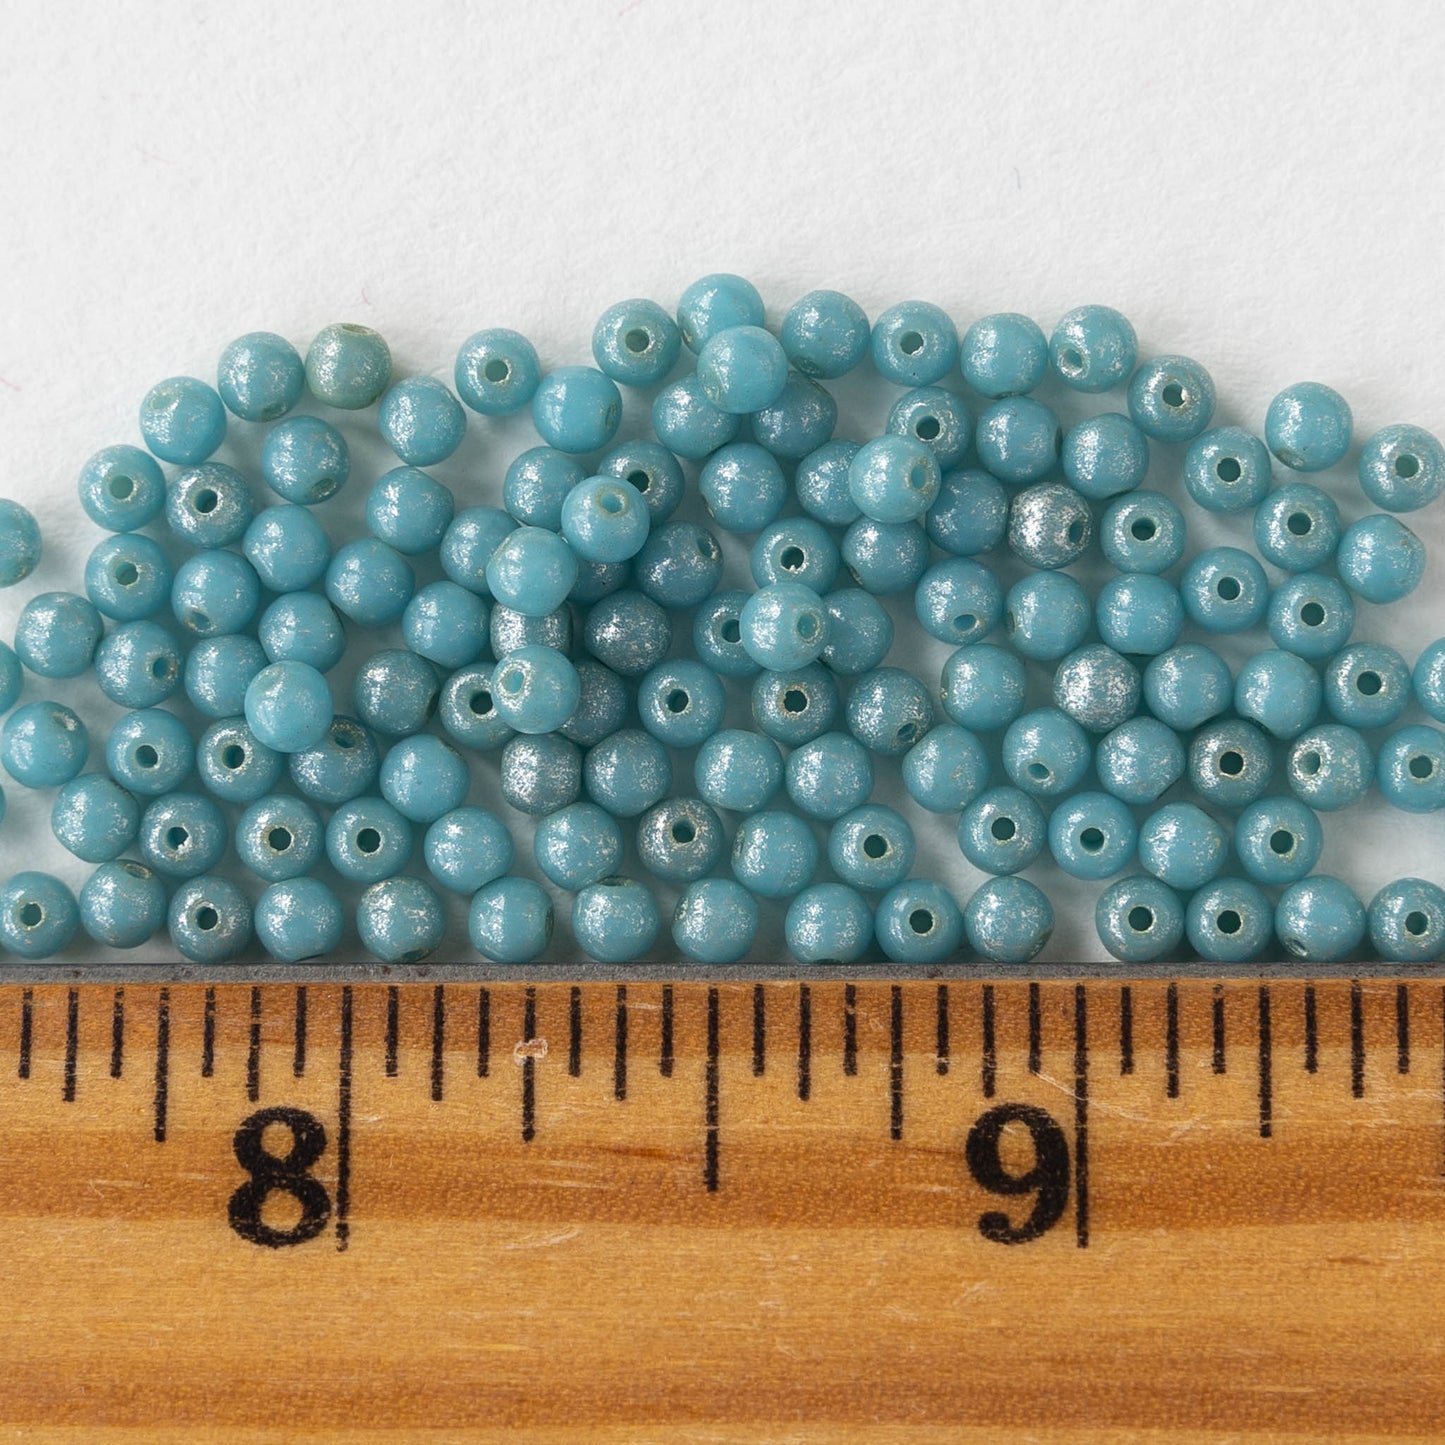 3mm Round Glass Beads - Light Blue with Silver Dust - 120 Beads